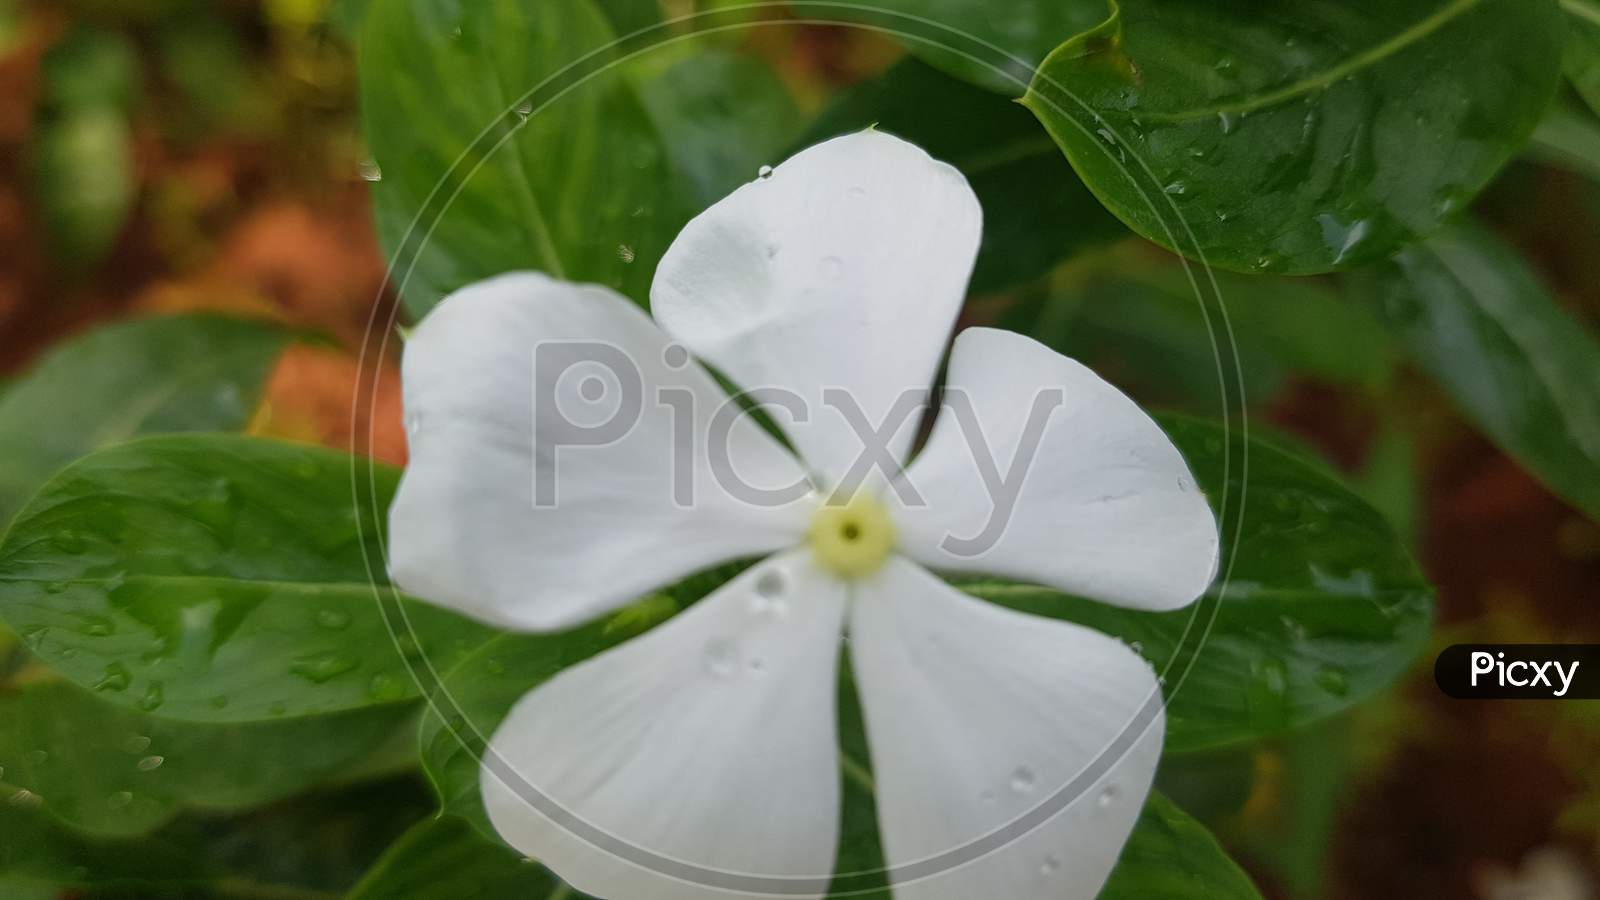 A white Vinca rosea with water droplets